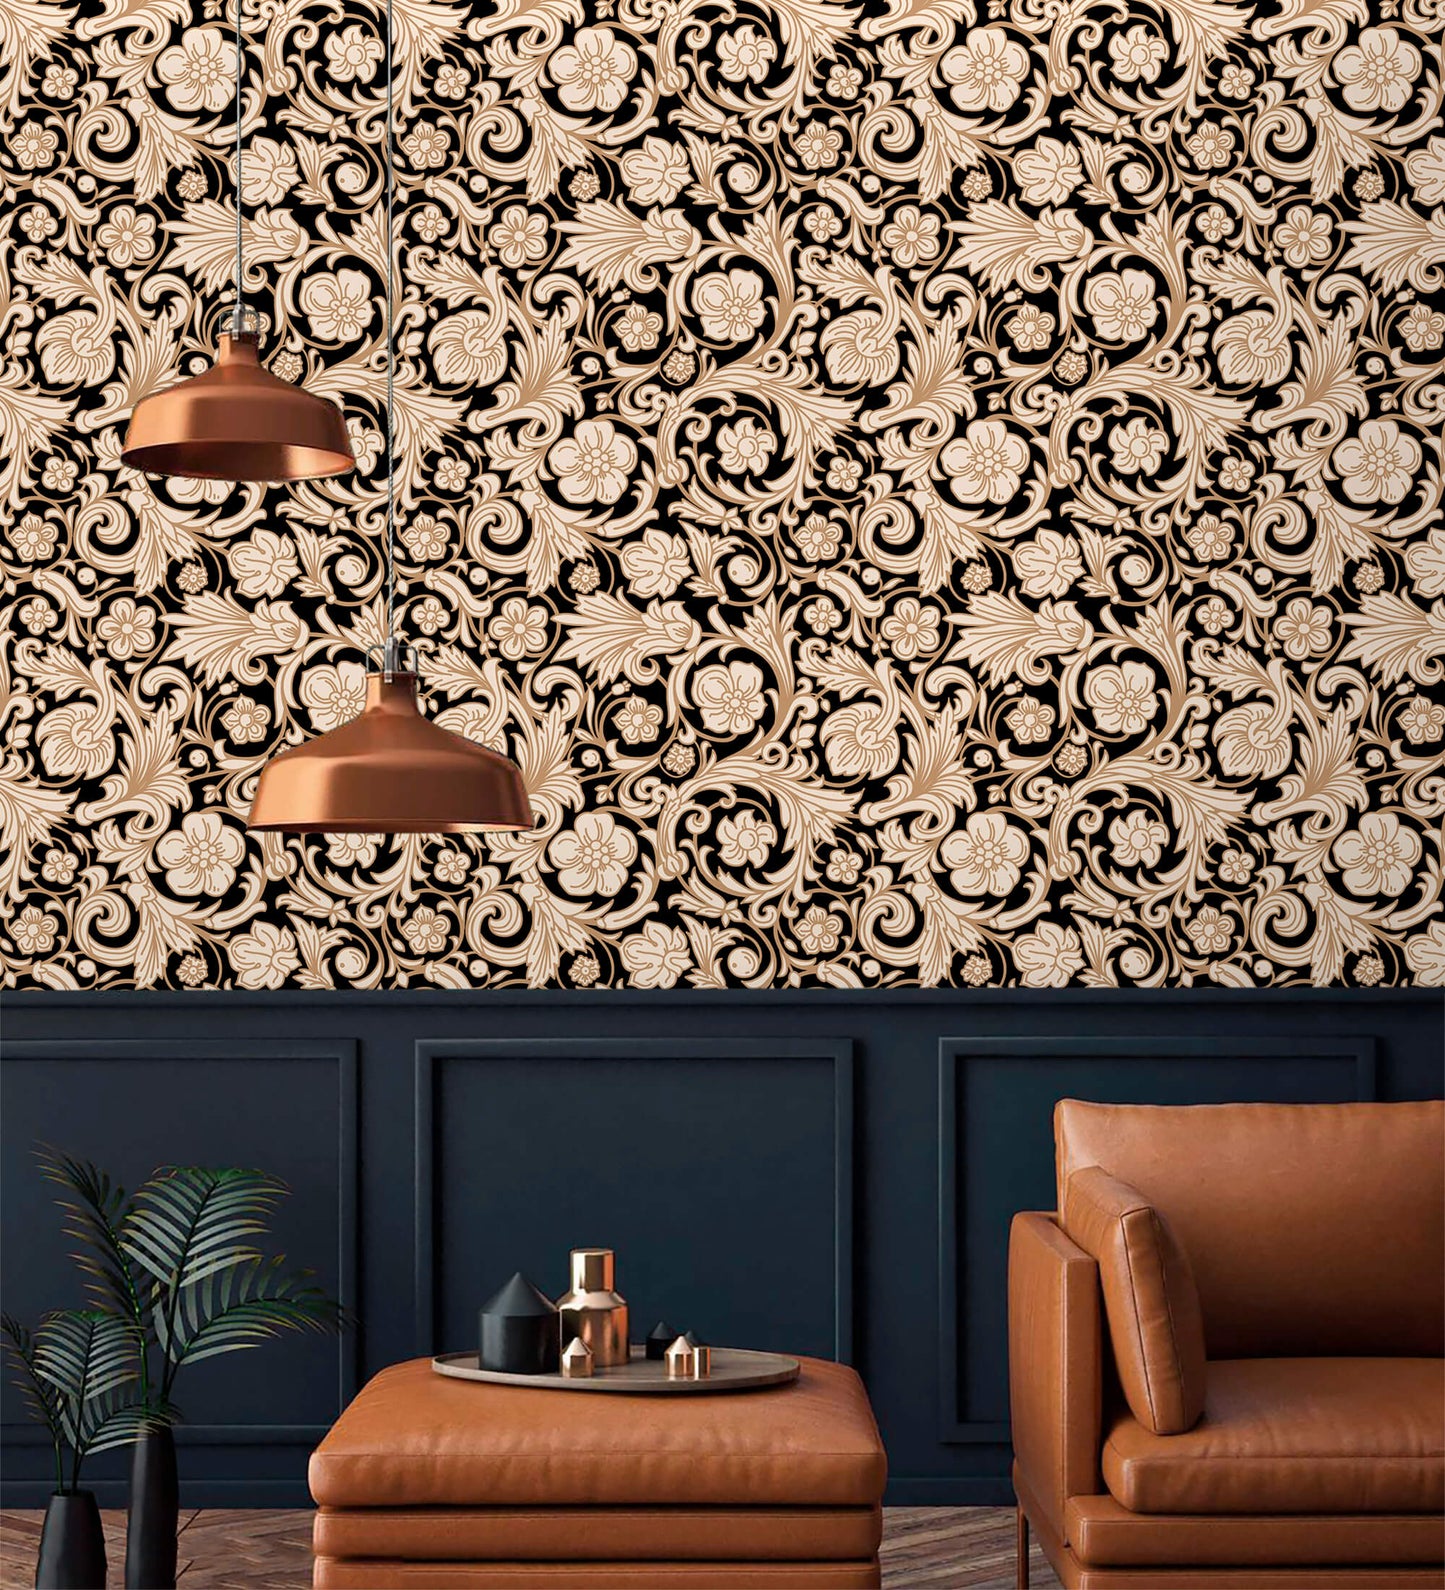 Victorian Elegance Wallpaper: Elevate your space with the opulence of the Victorian era through this exquisite design, featuring intricate patterns and motifs that exude timeless elegance and sophistication.